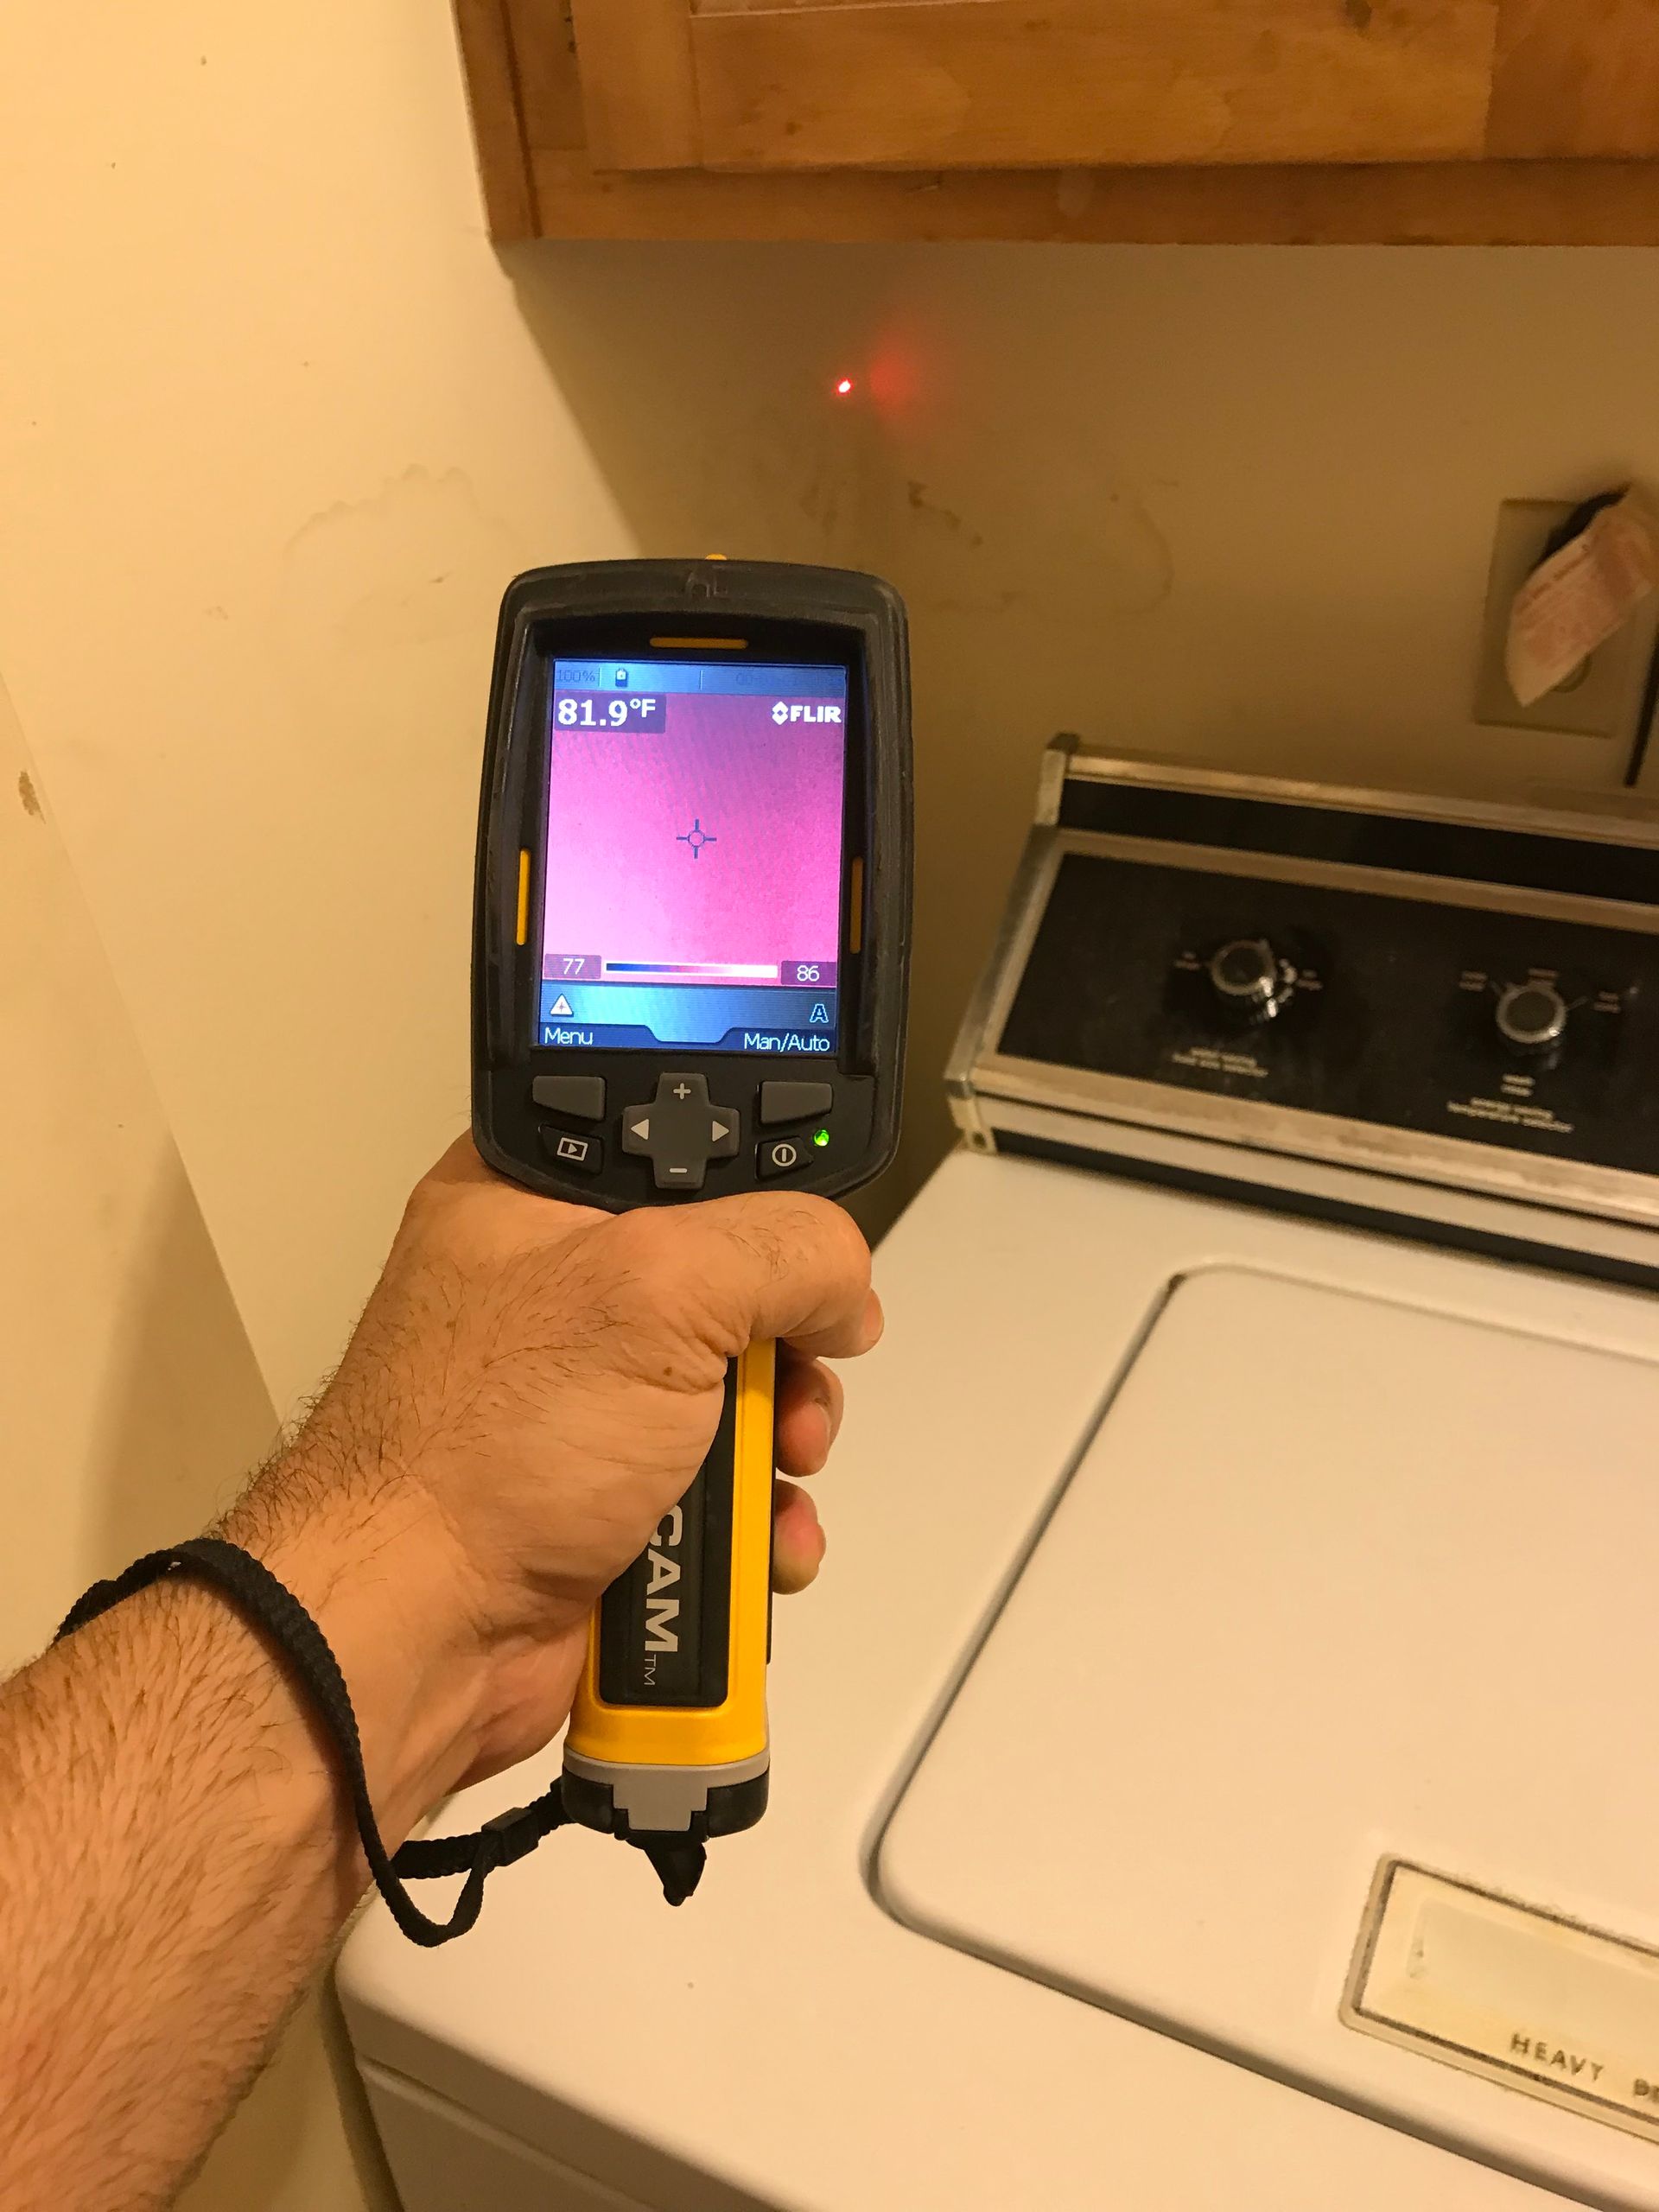 a person is holding a thermal camera in front of a washer and dryer